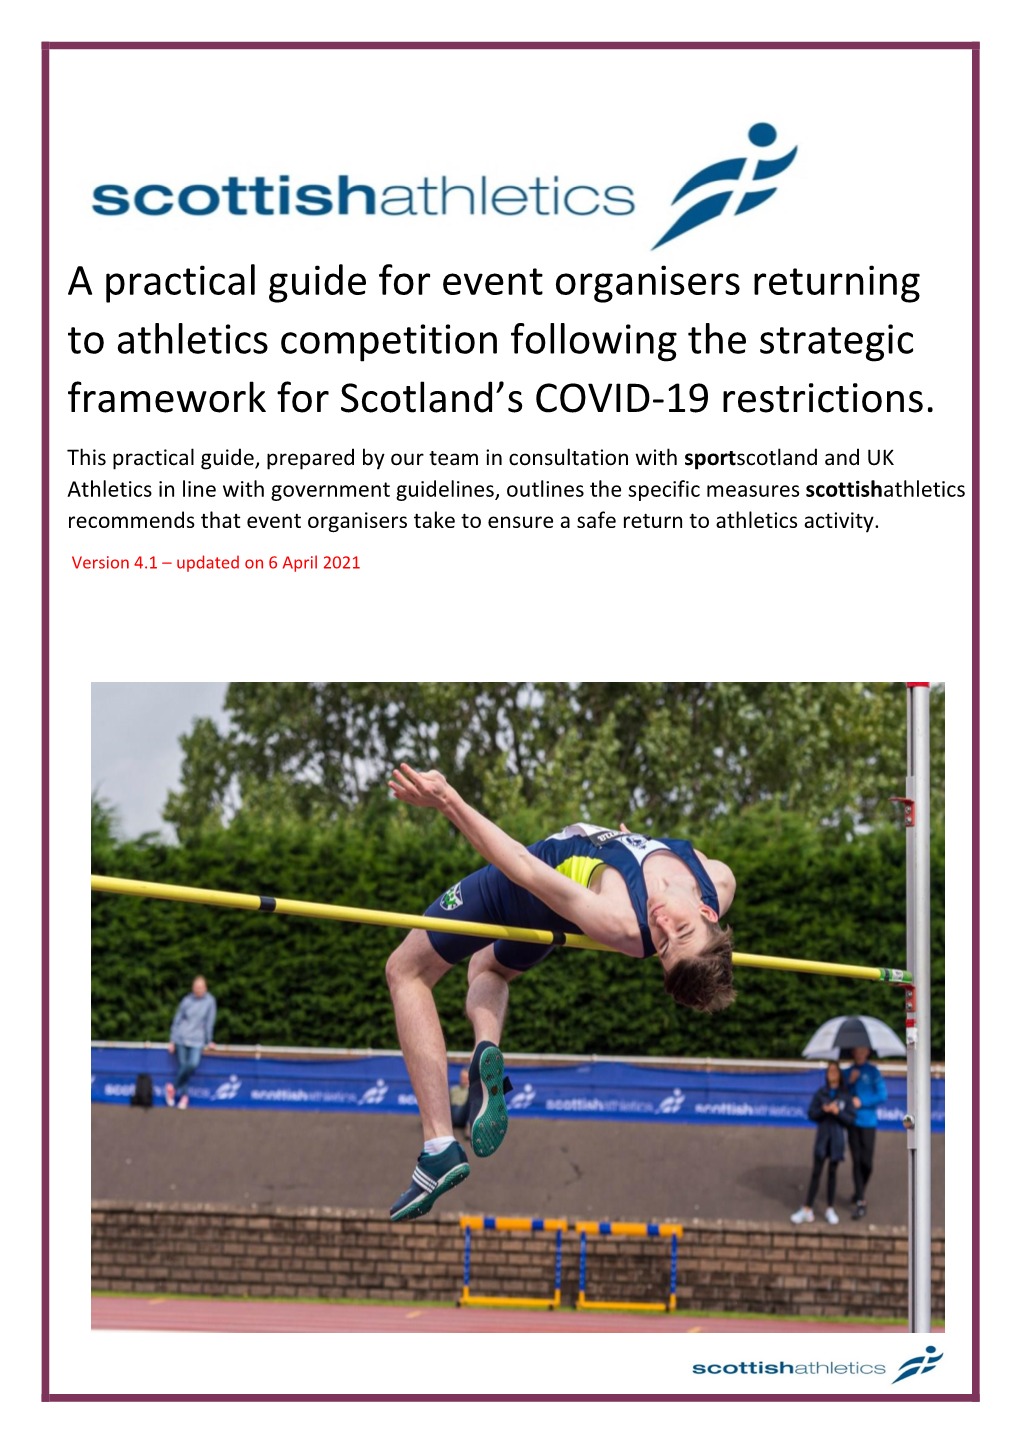 A Practical Guide for Event Organisers Returning to Athletics Competition Following the Strategic Framework for Scotland’S COVID-19 Restrictions